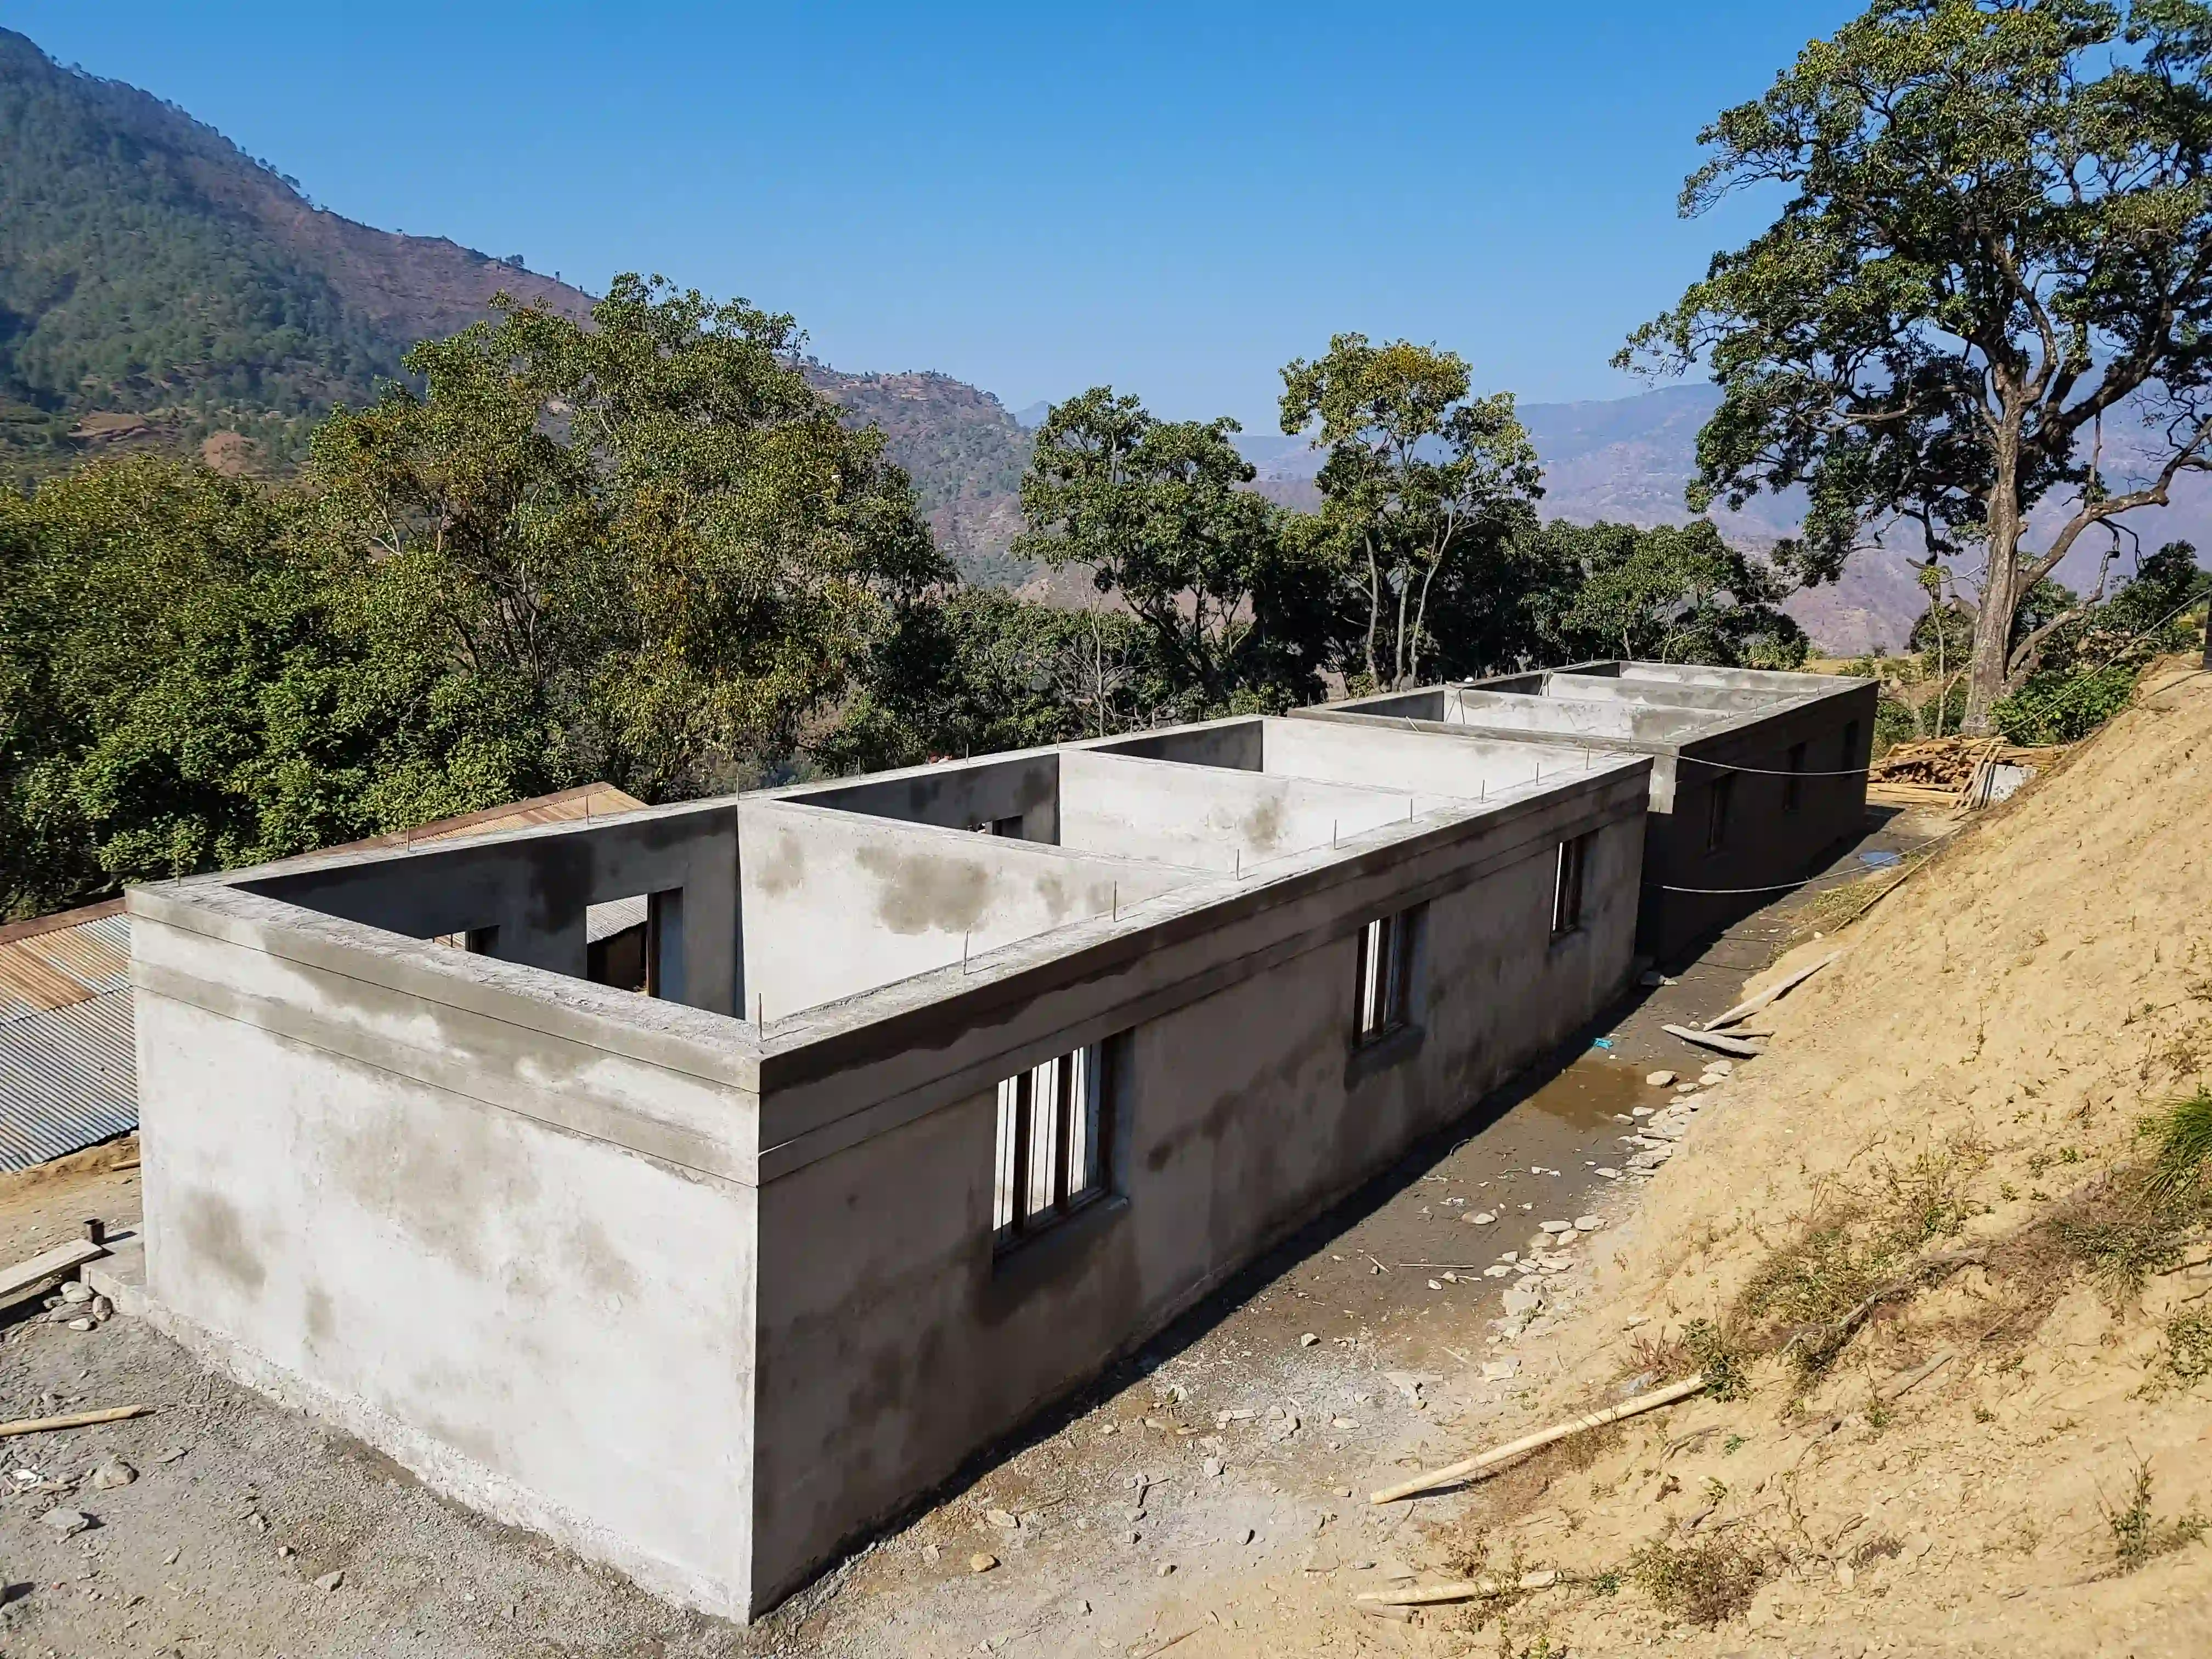 A concrete school built to roof level on hillside